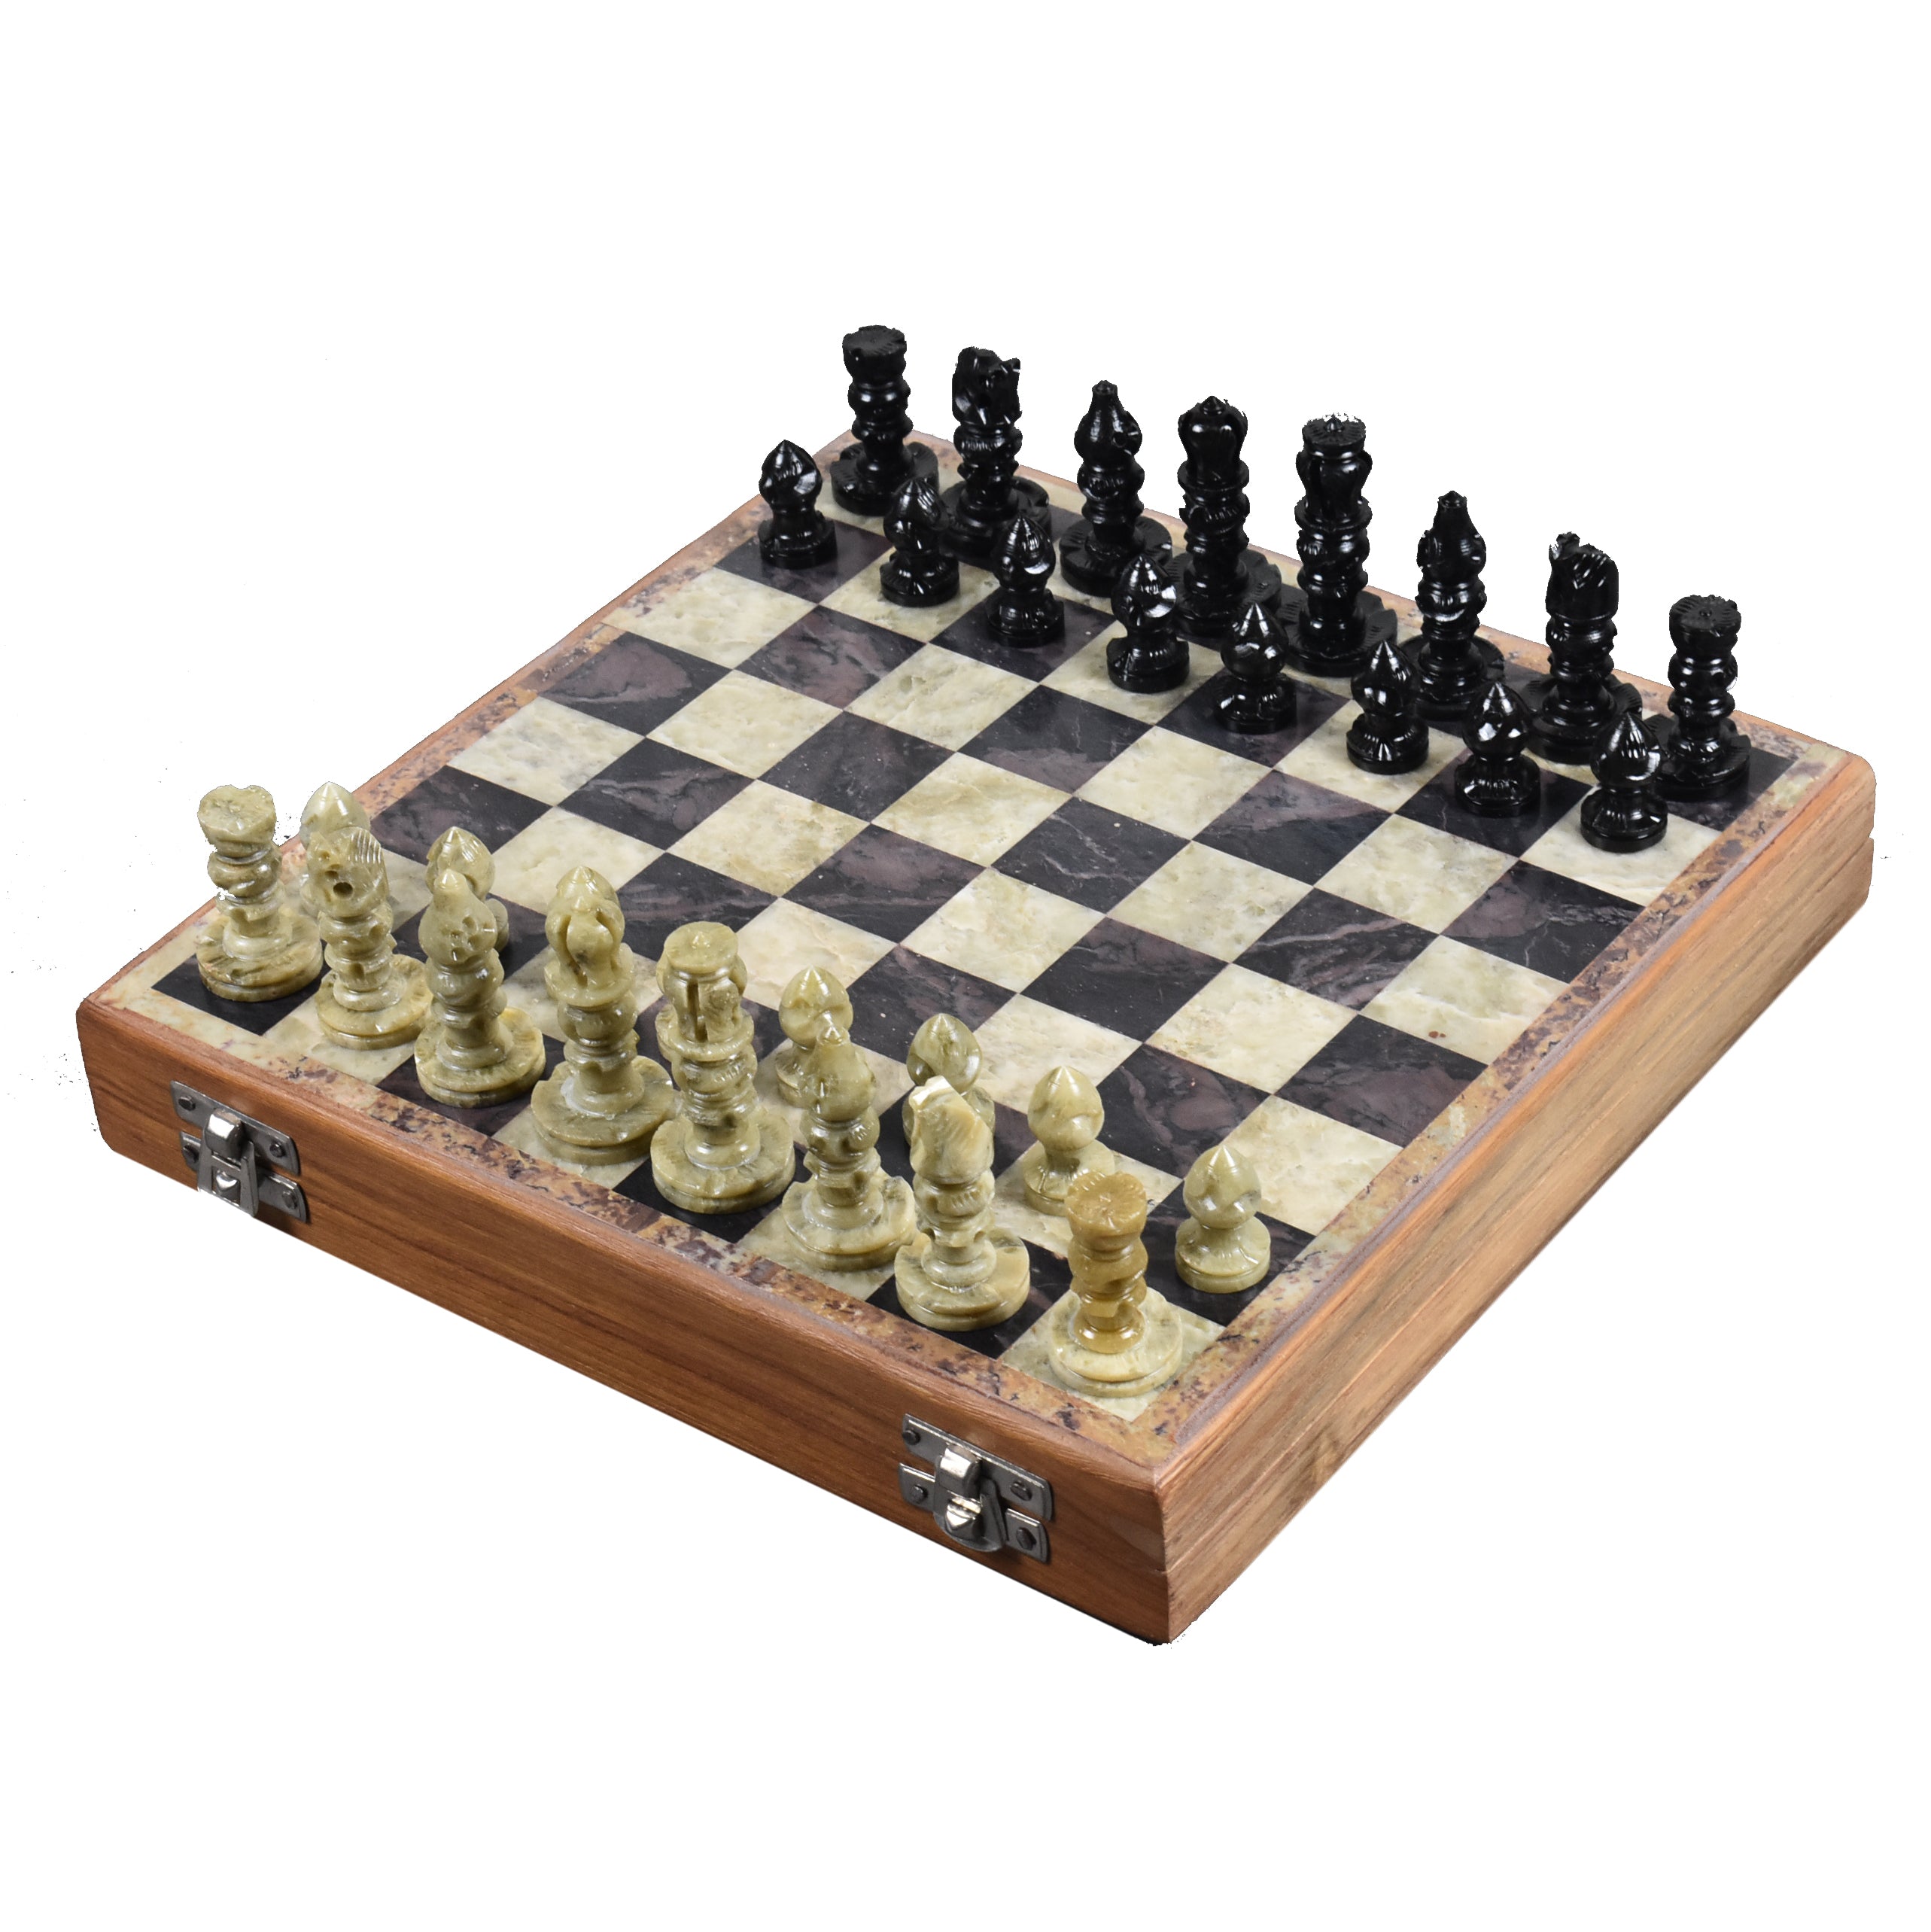 Artistic English Series Hand Carved Vintage Chess Pieces Only